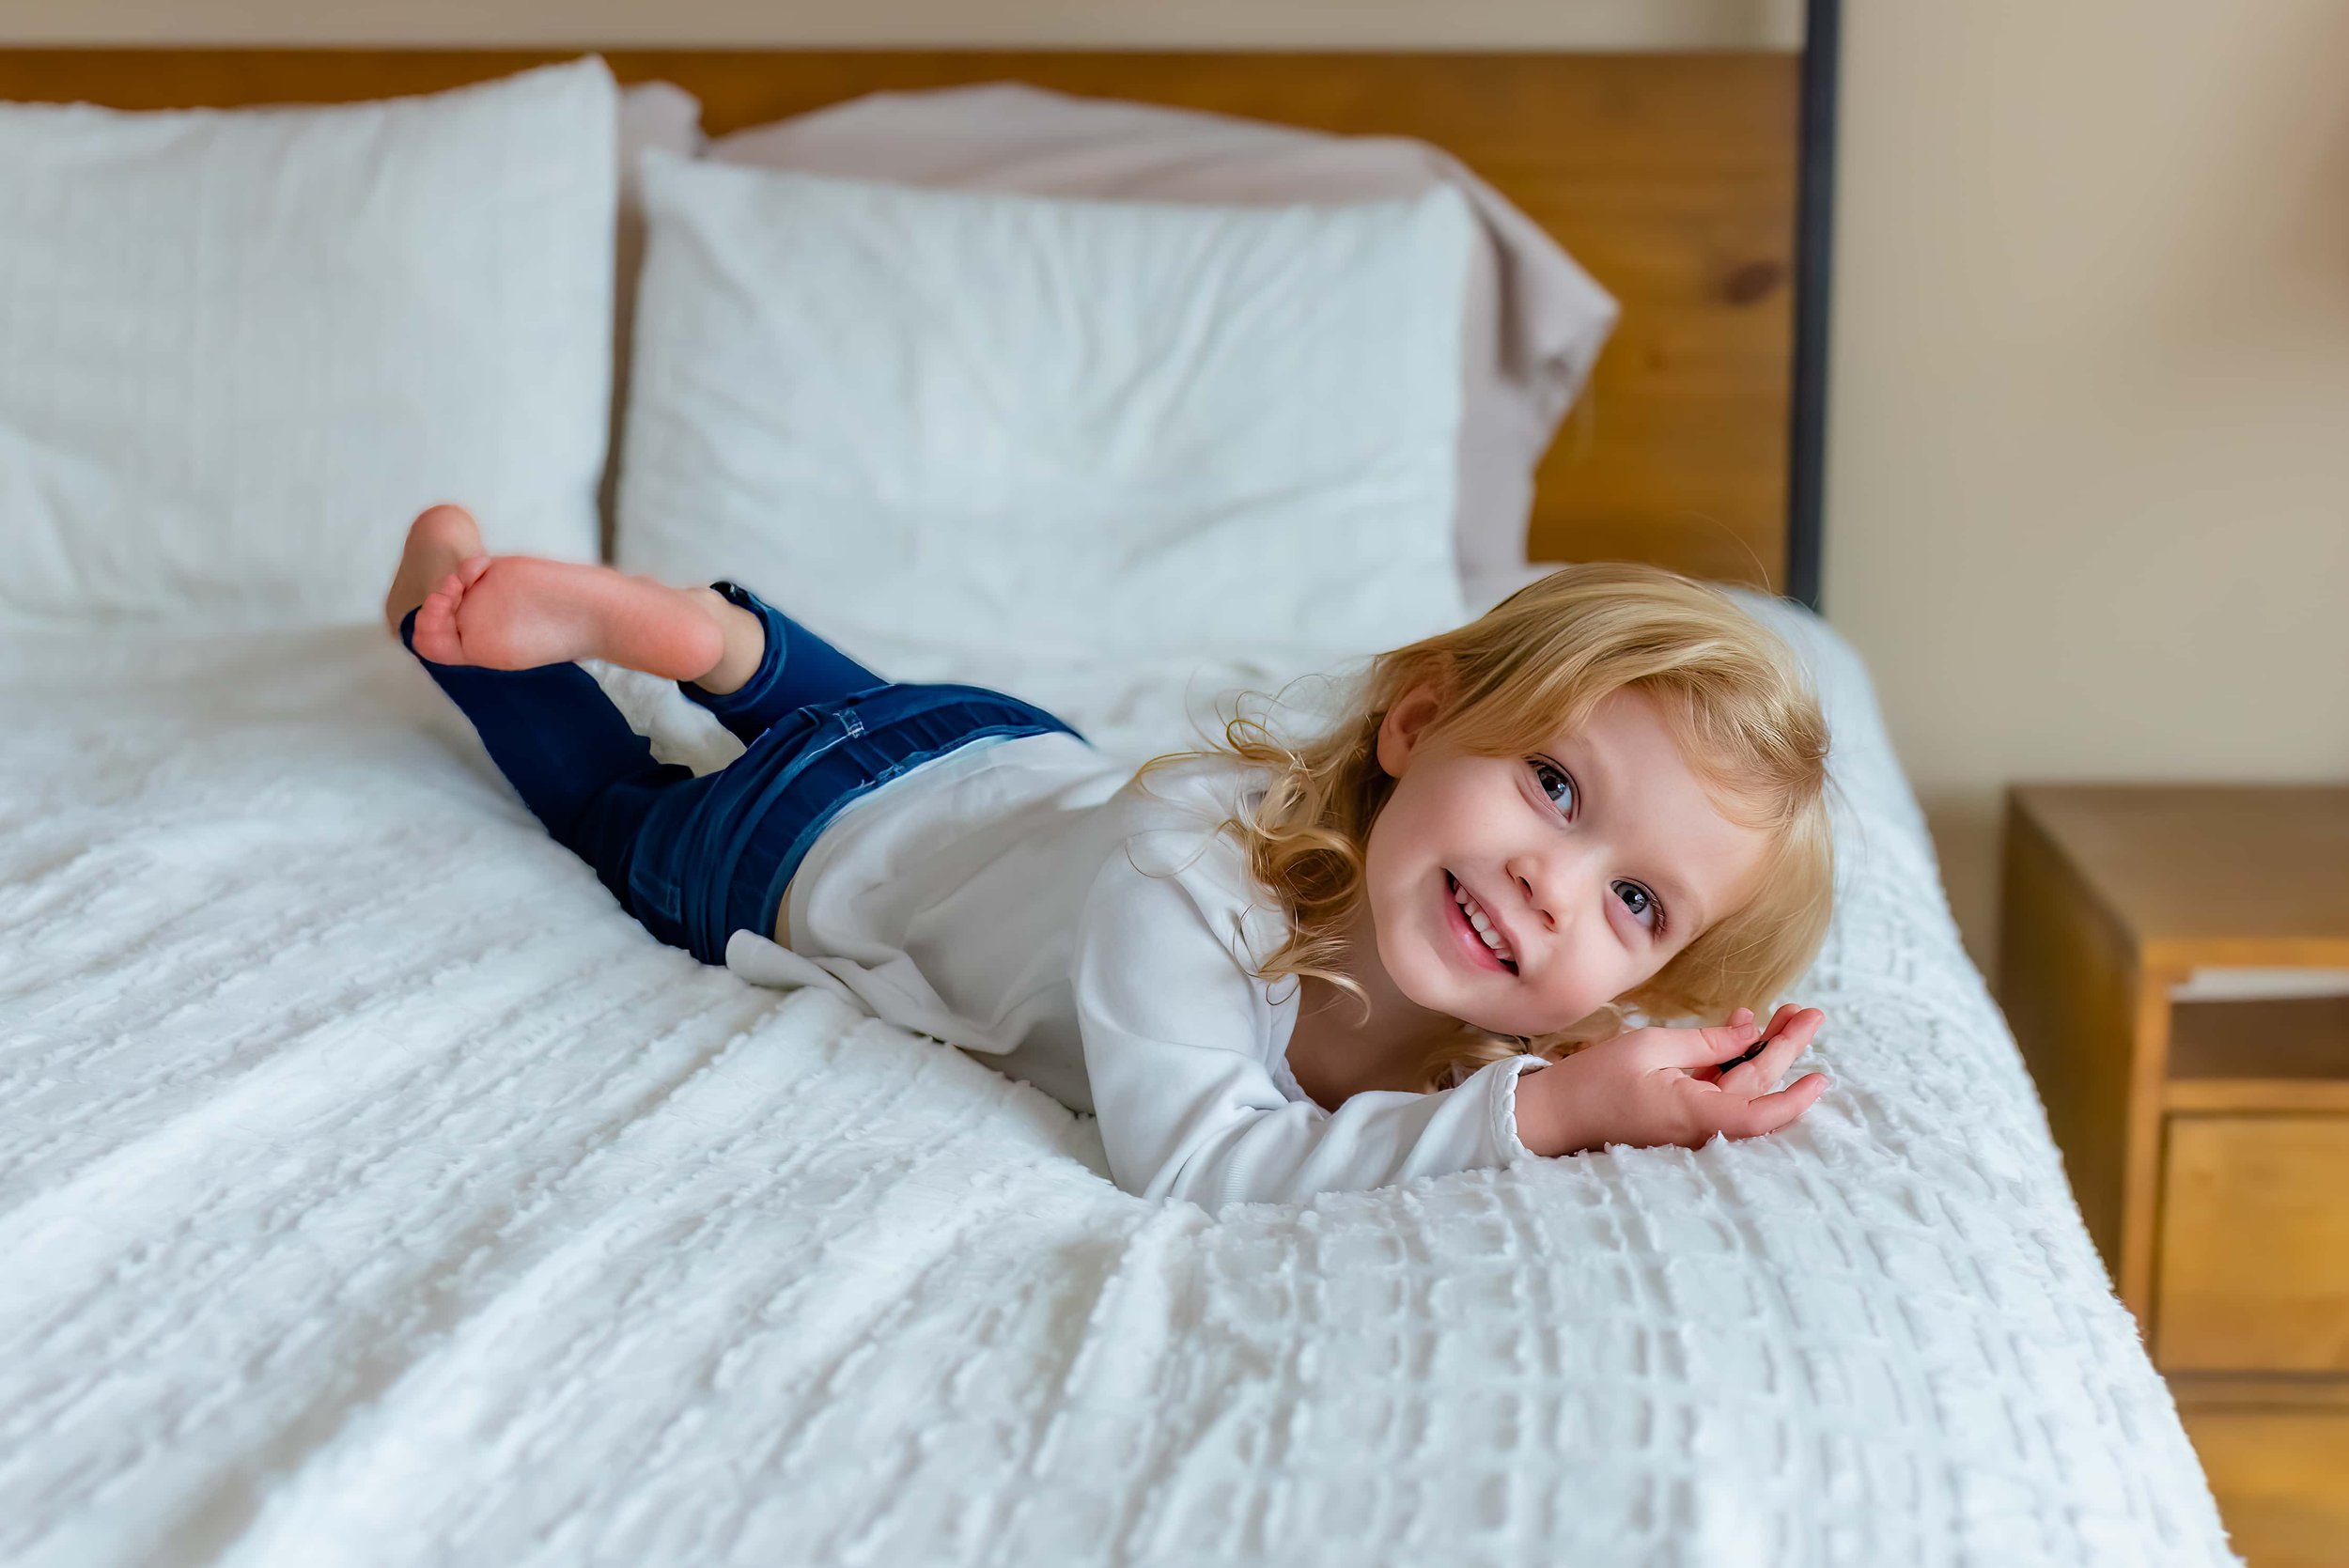 Maryland Lifestyle Newborn Photographer - little girl playing on a bed at a newborn session 